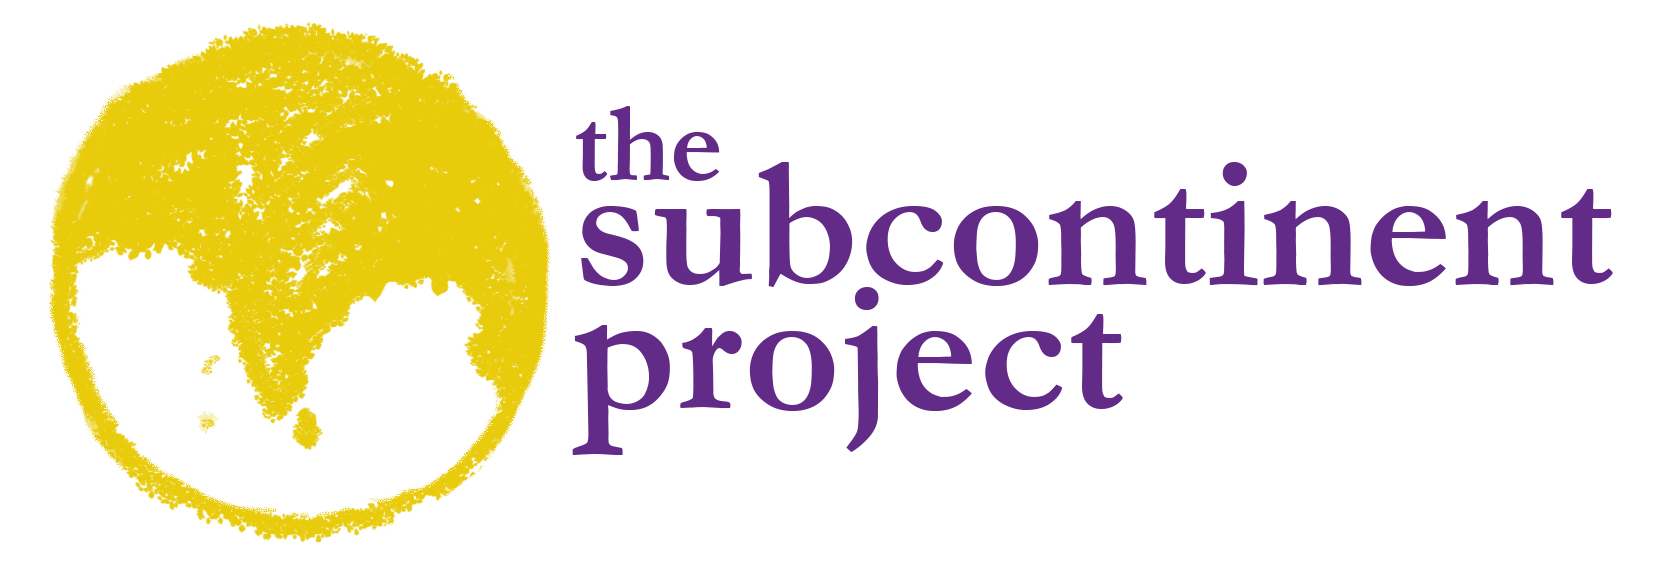 The Subcontinent Project